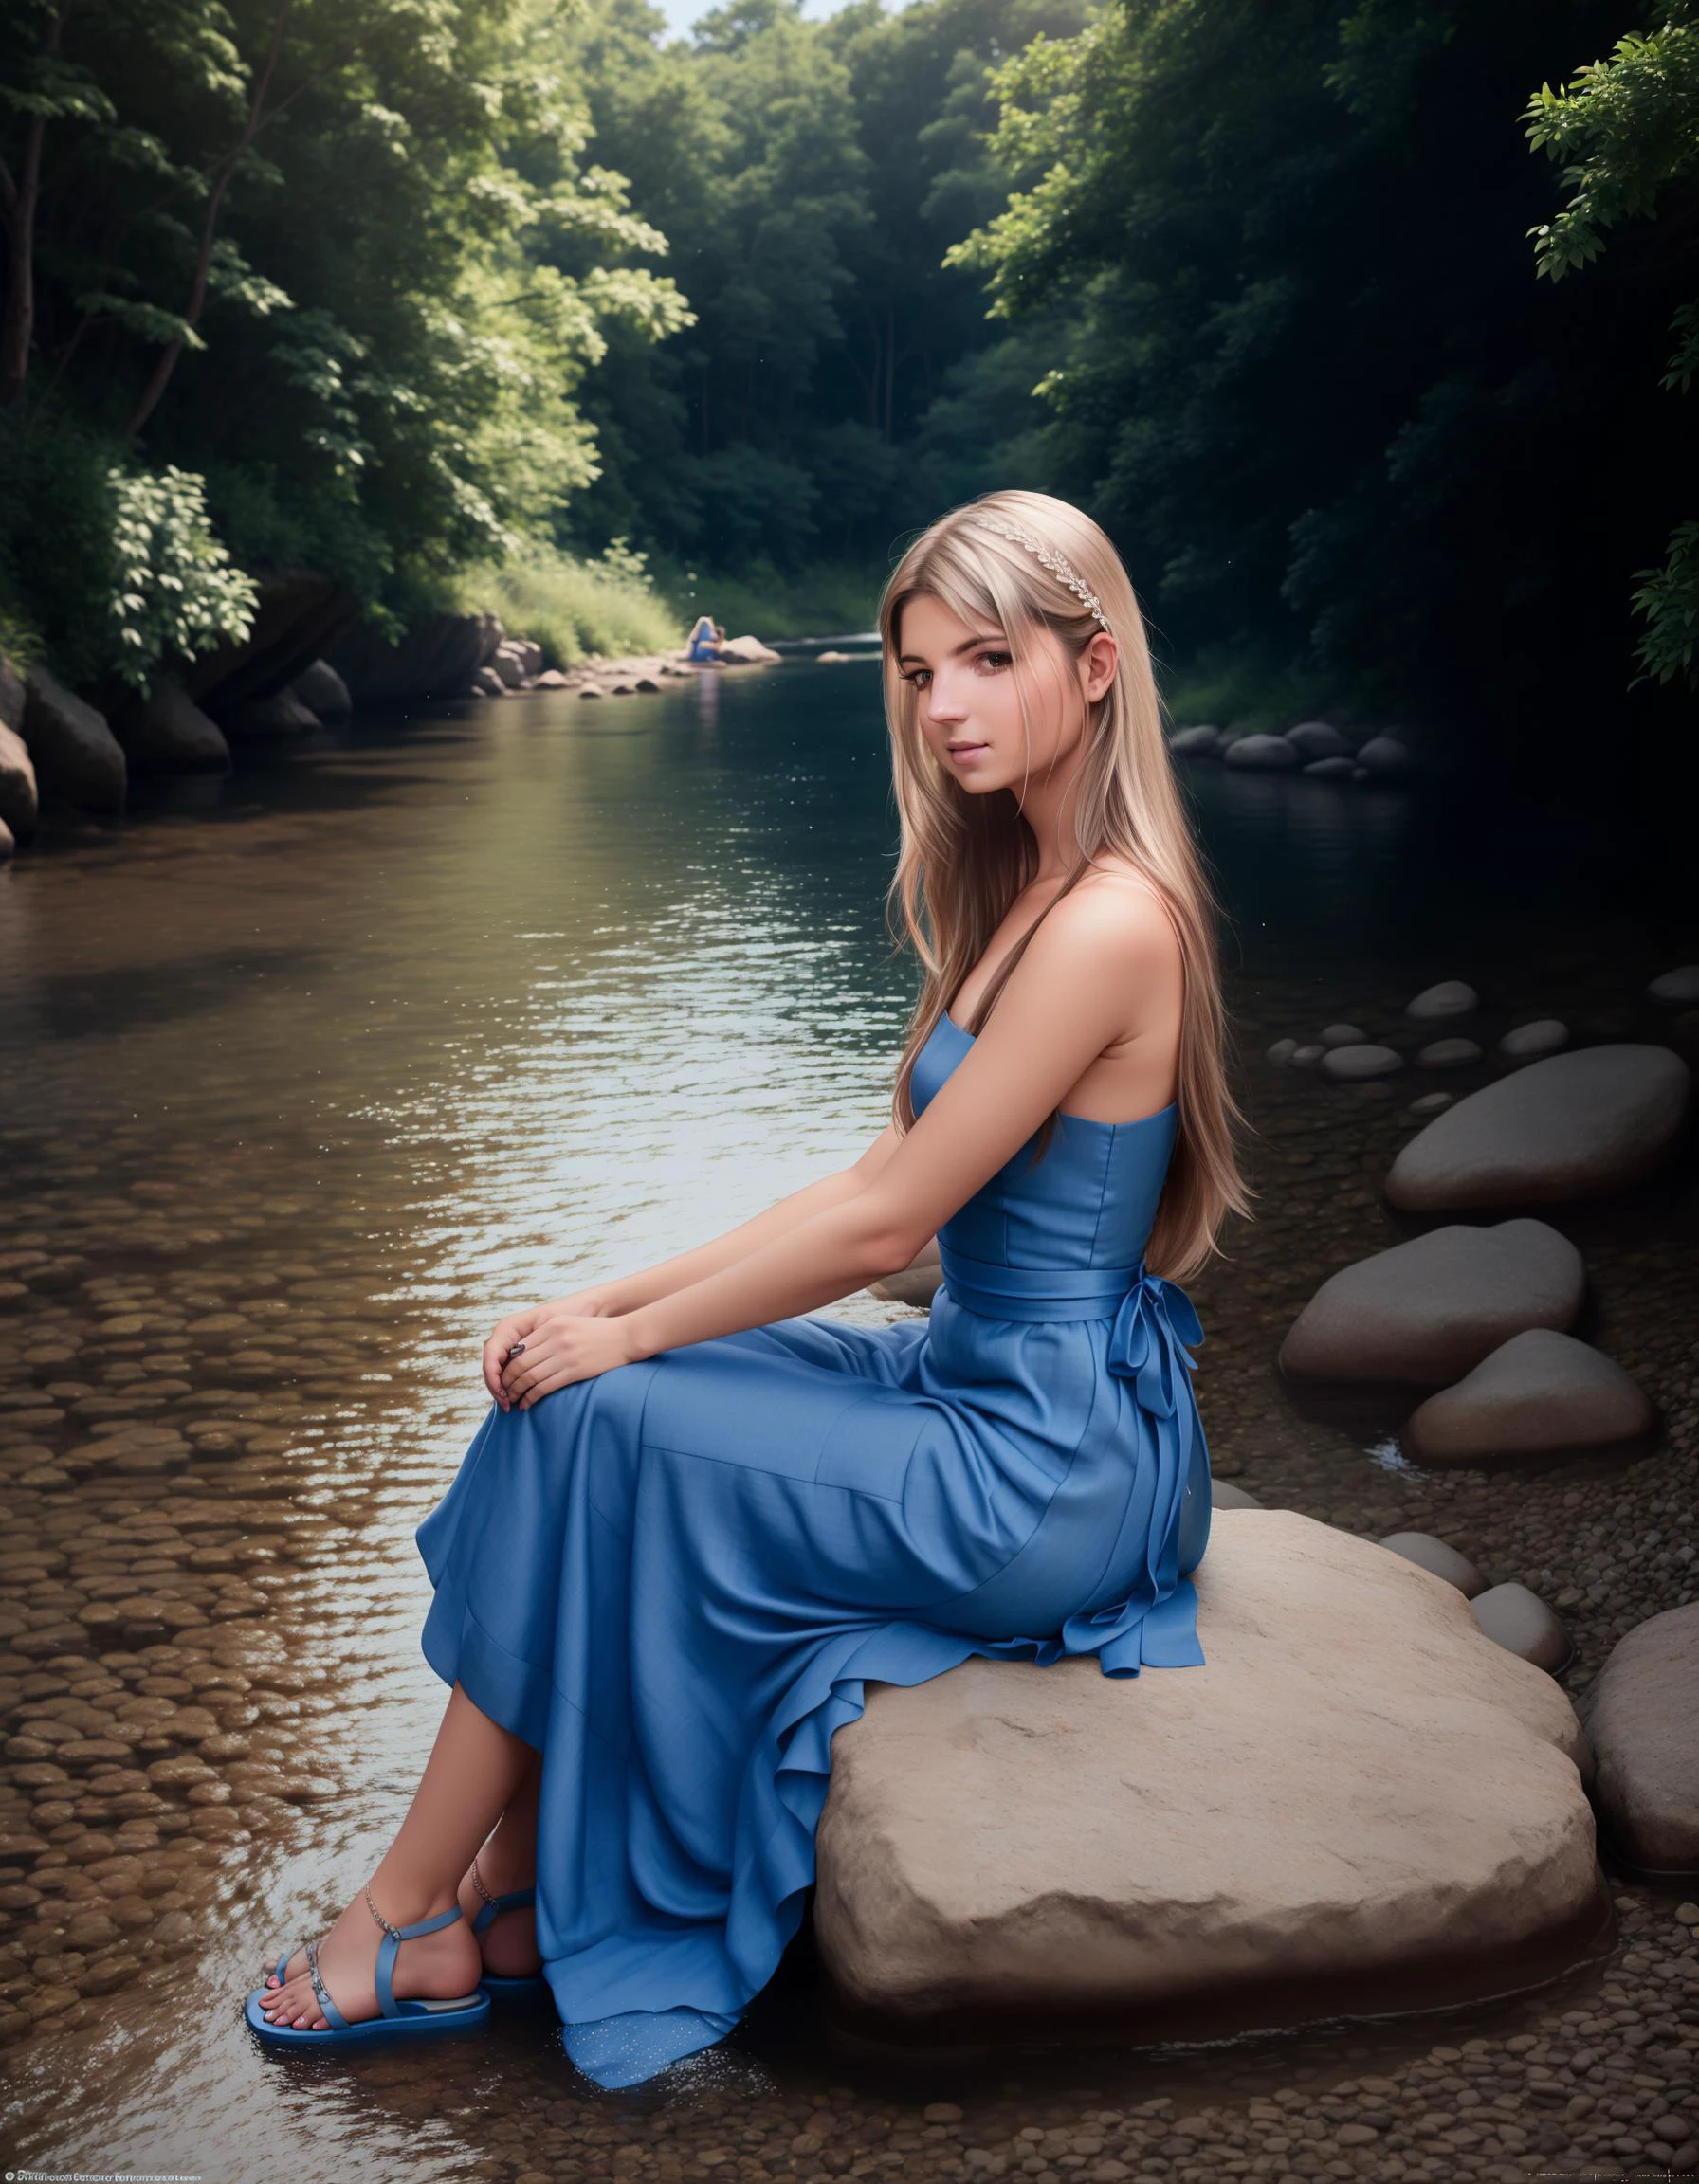 GinaGerson, woman,
Vixen is sitting on a rock by a river, her long tail swishing in the water. She is watching the fish swim by, and she looks peaceful and serene. She is wearing a blue dress made of linen. The dress is simple and elegant, and it makes her look like a princess. She is also wearing a pair of sandals made of leather.